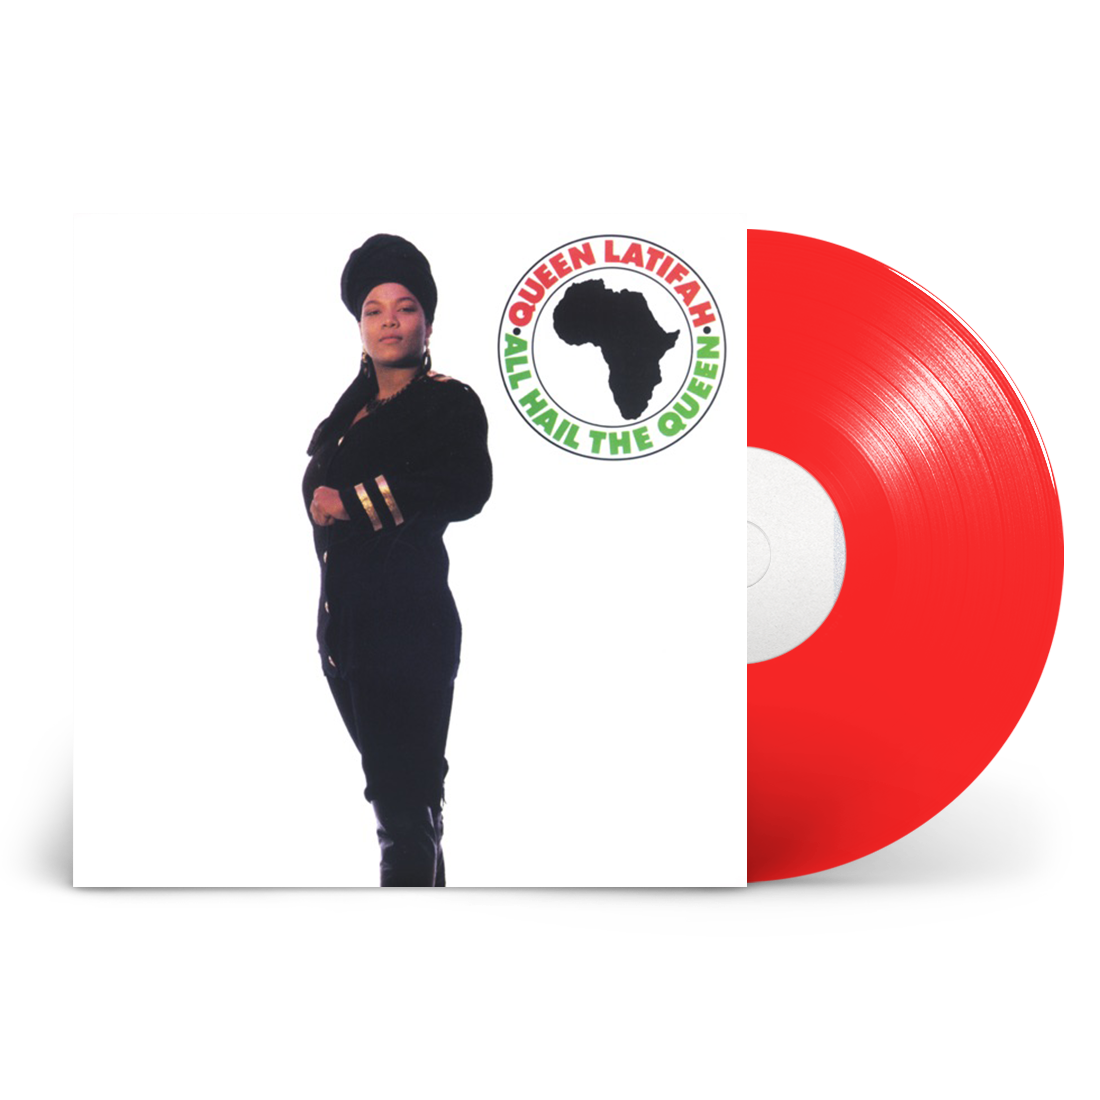 All Hail The Queen: Limited Red Vinyl LP